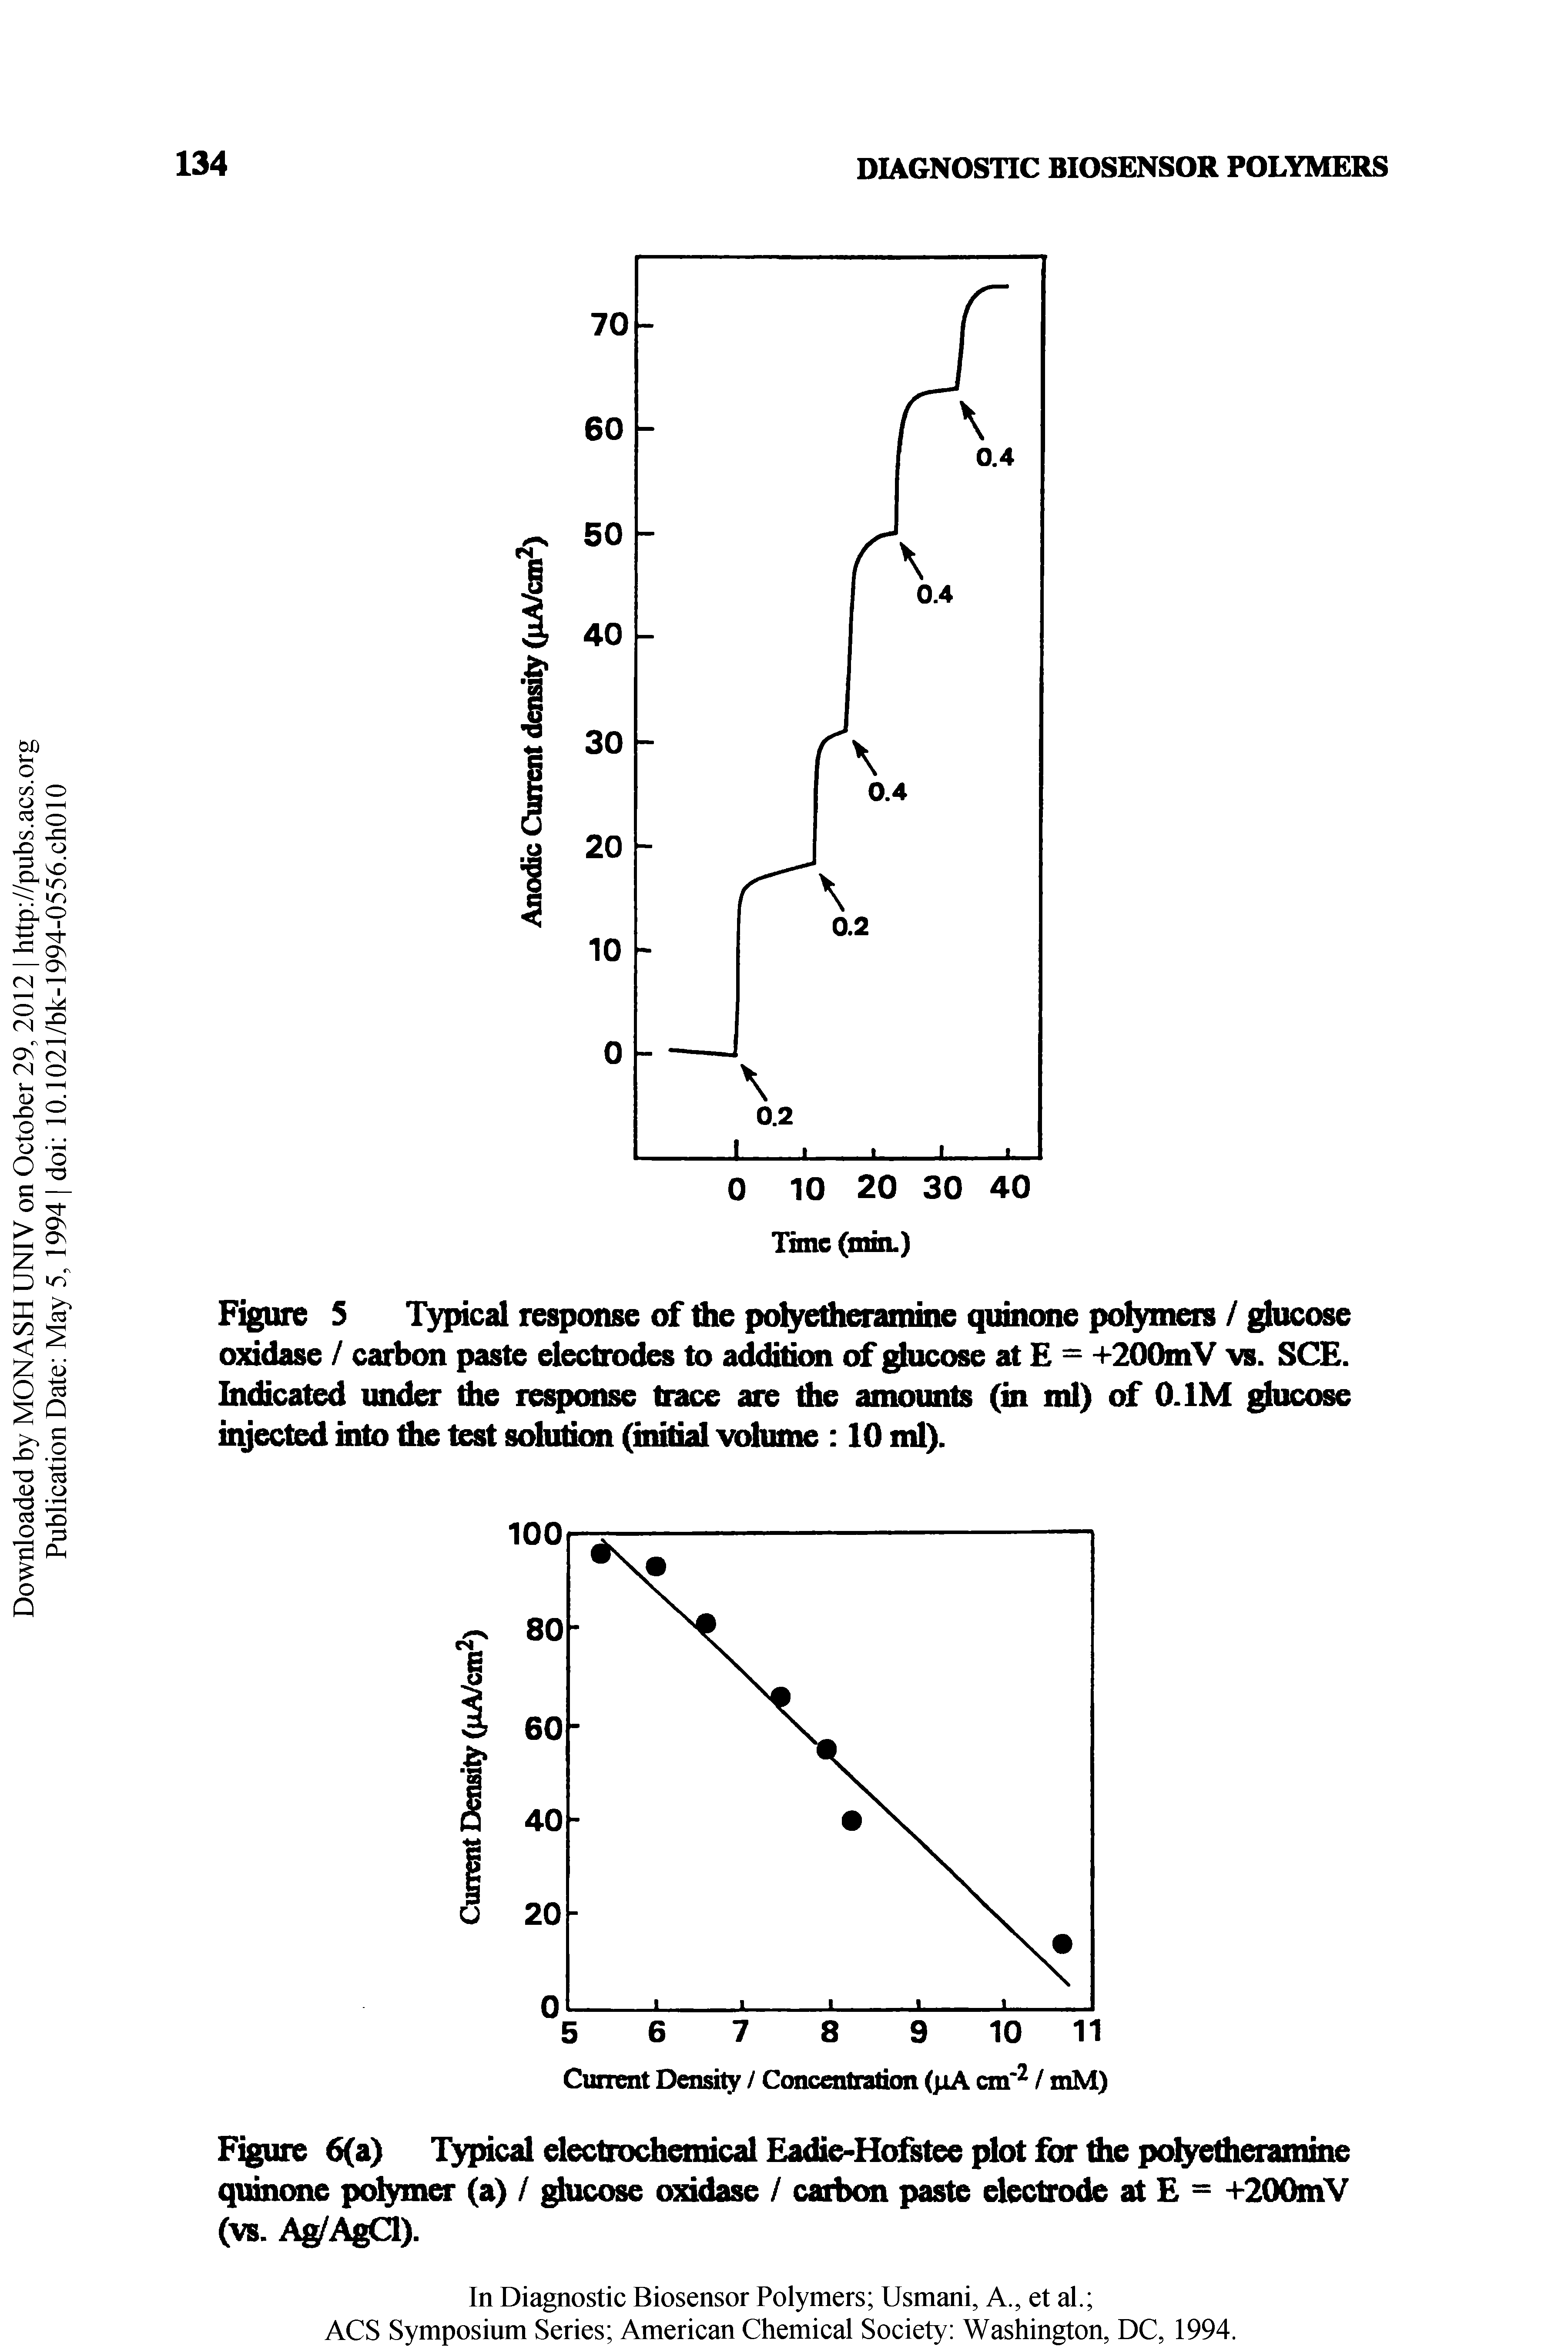 Figure S Typical response of the pofyetheramine quinone polymers / glucose oxidase / carbon paste electrodes to addition of glucose at = +200mV vs. SCE. Indicated under the response trace are the amounts (in ml) of O.IM ucose injected into die test solution (initial volume 10 ml).